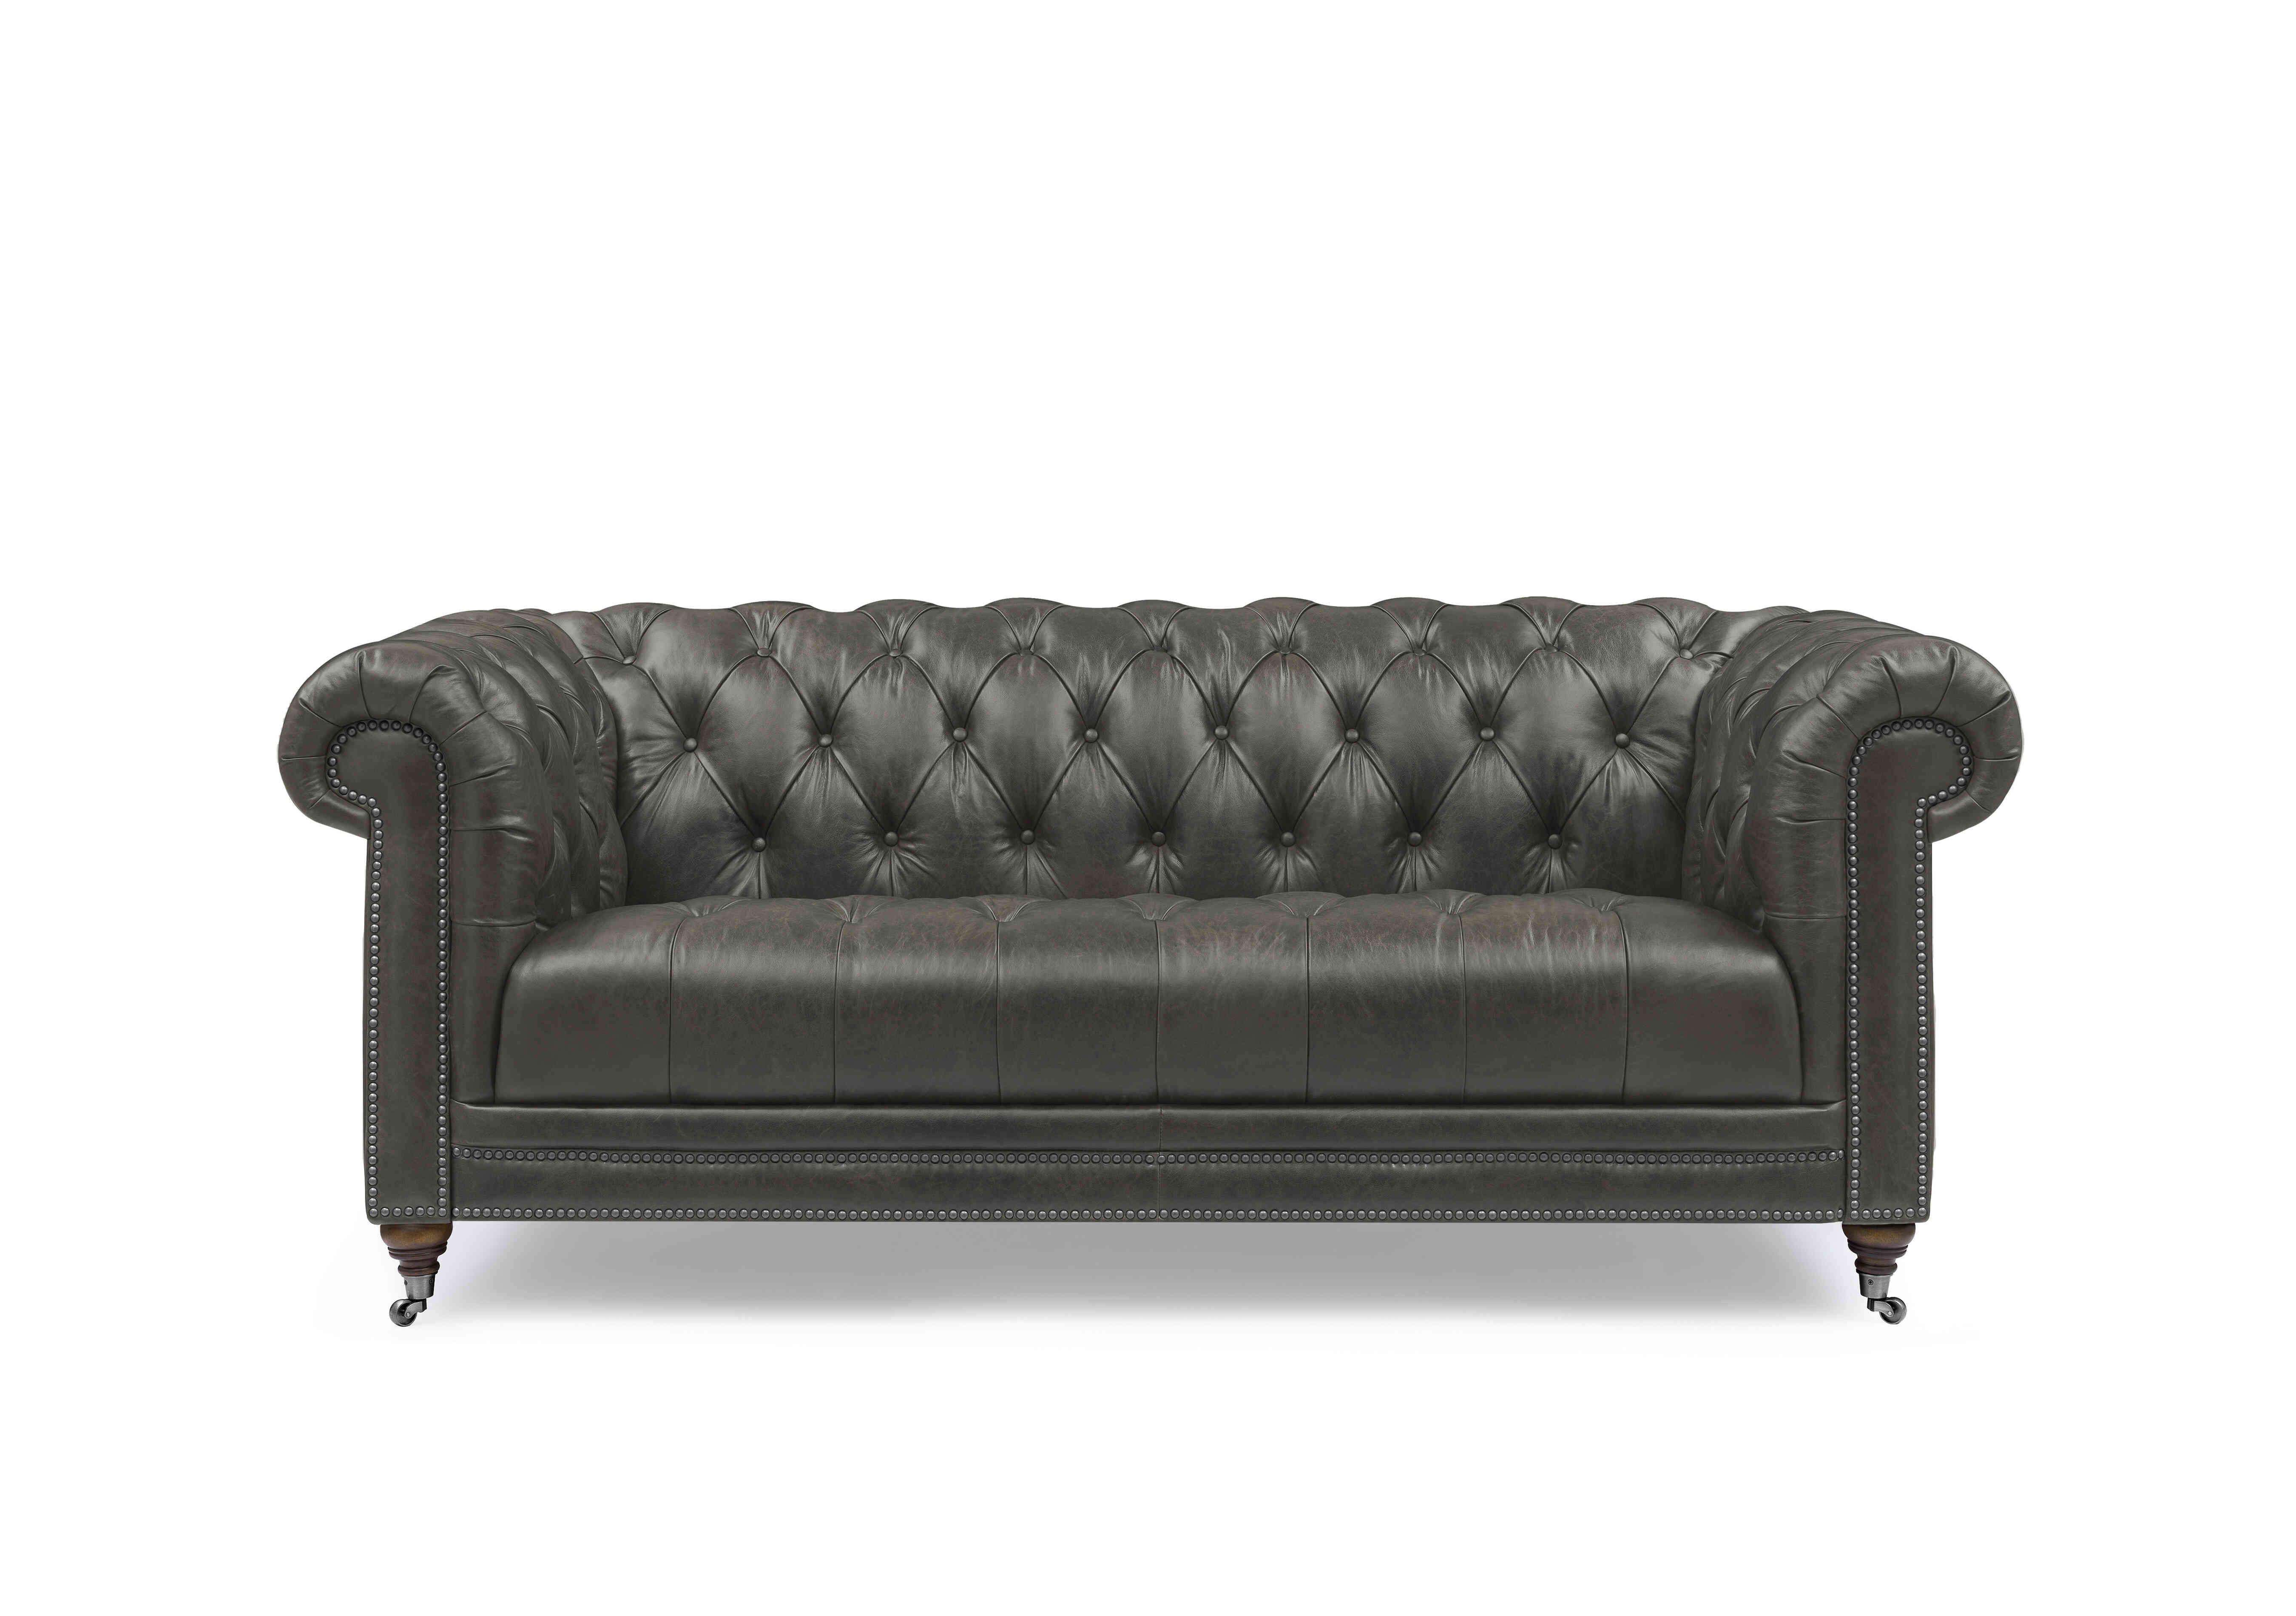 Walter 3 Seater Leather Chesterfield Sofa in X3y2-1966ls Granite on Furniture Village